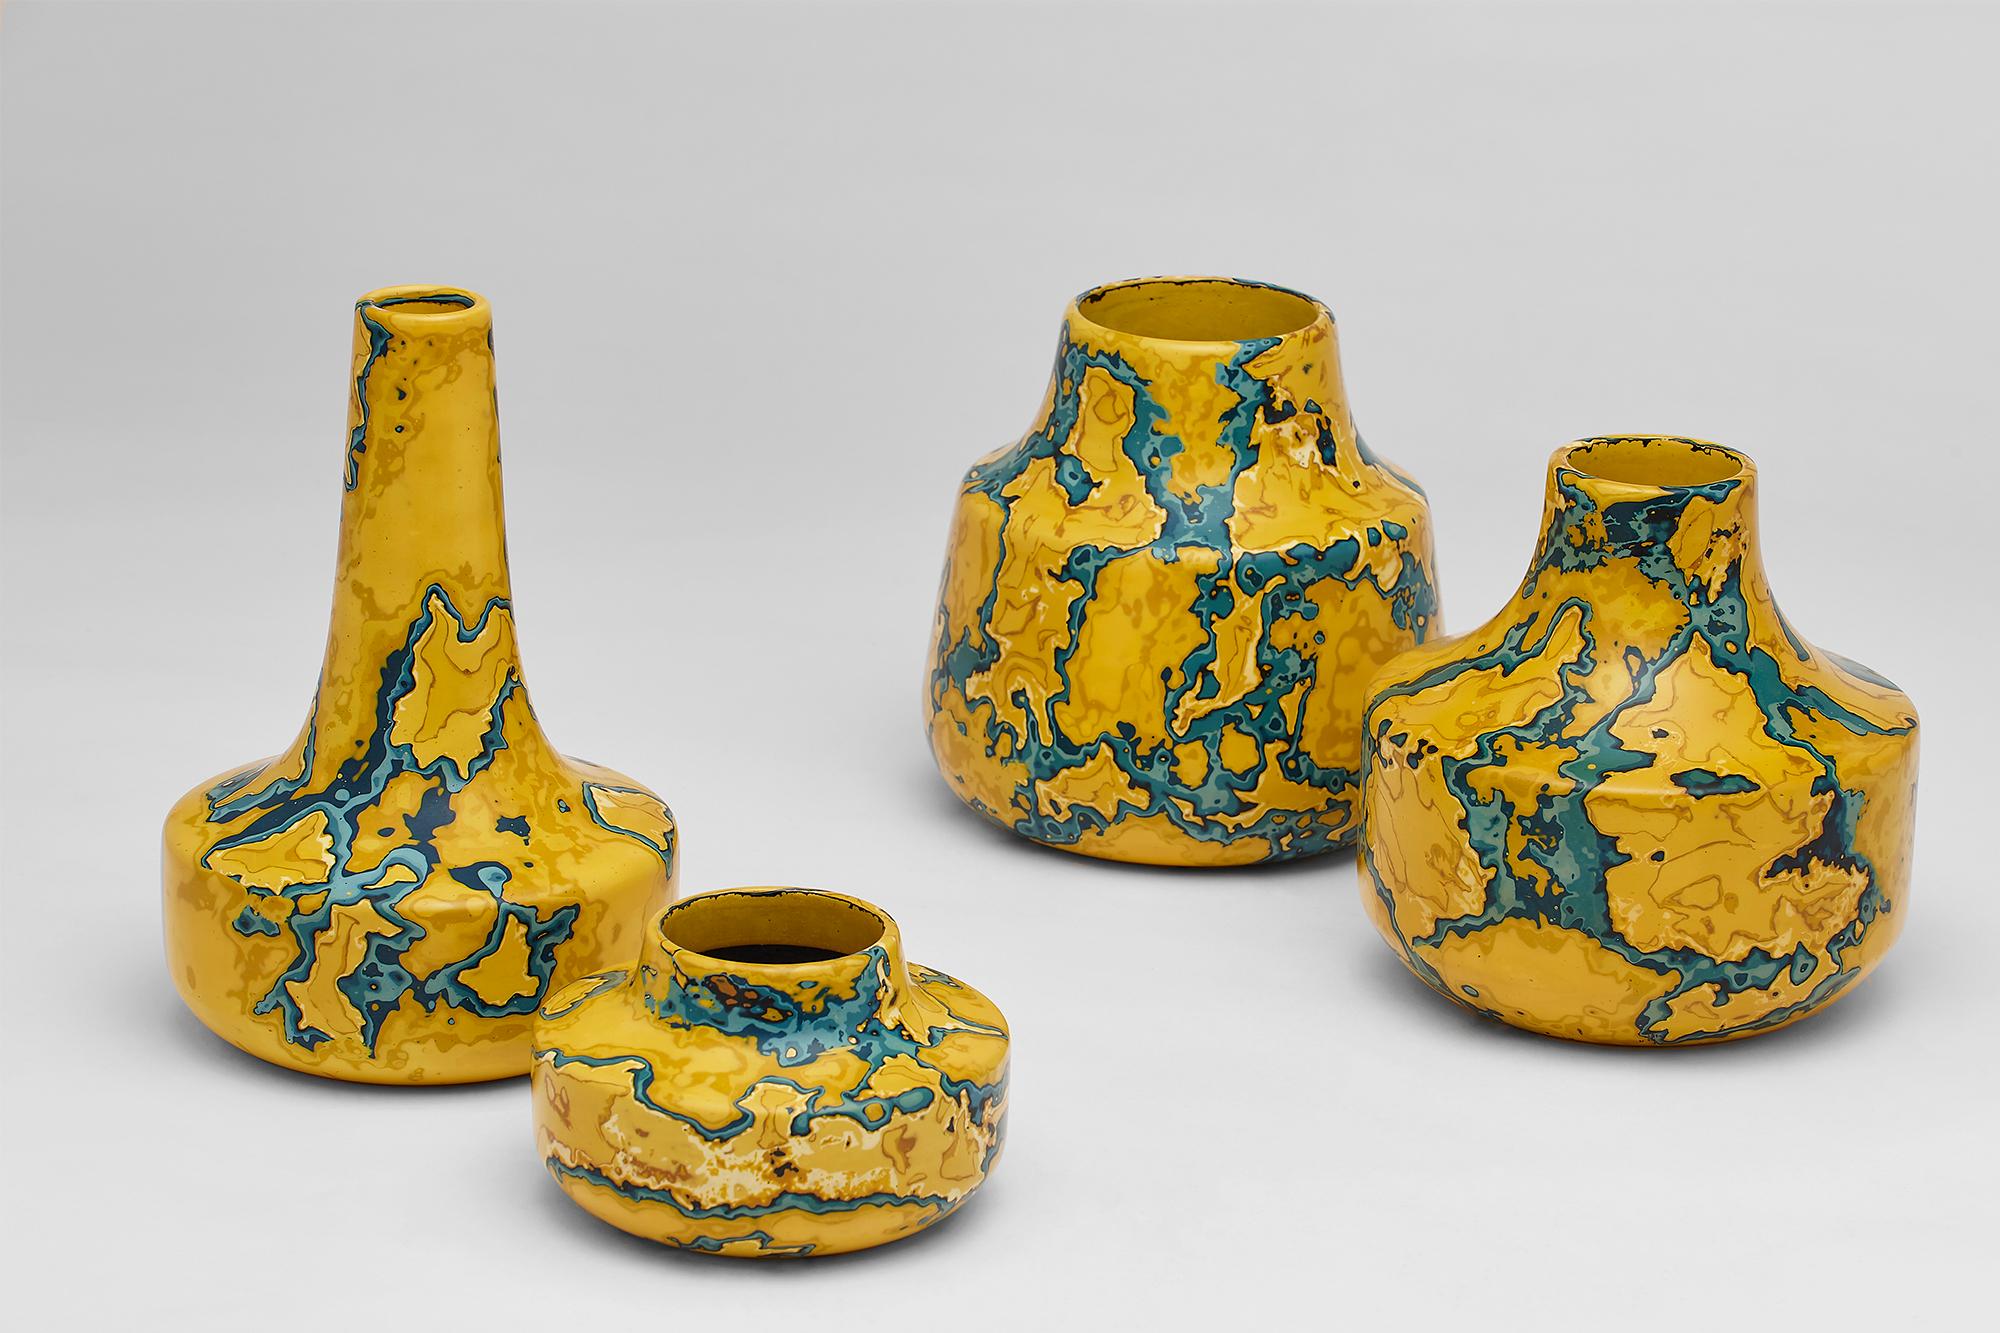 Cast Ming Stone, set of four yellow & blue Jesmonite vessels /vases by Nic Parnell For Sale